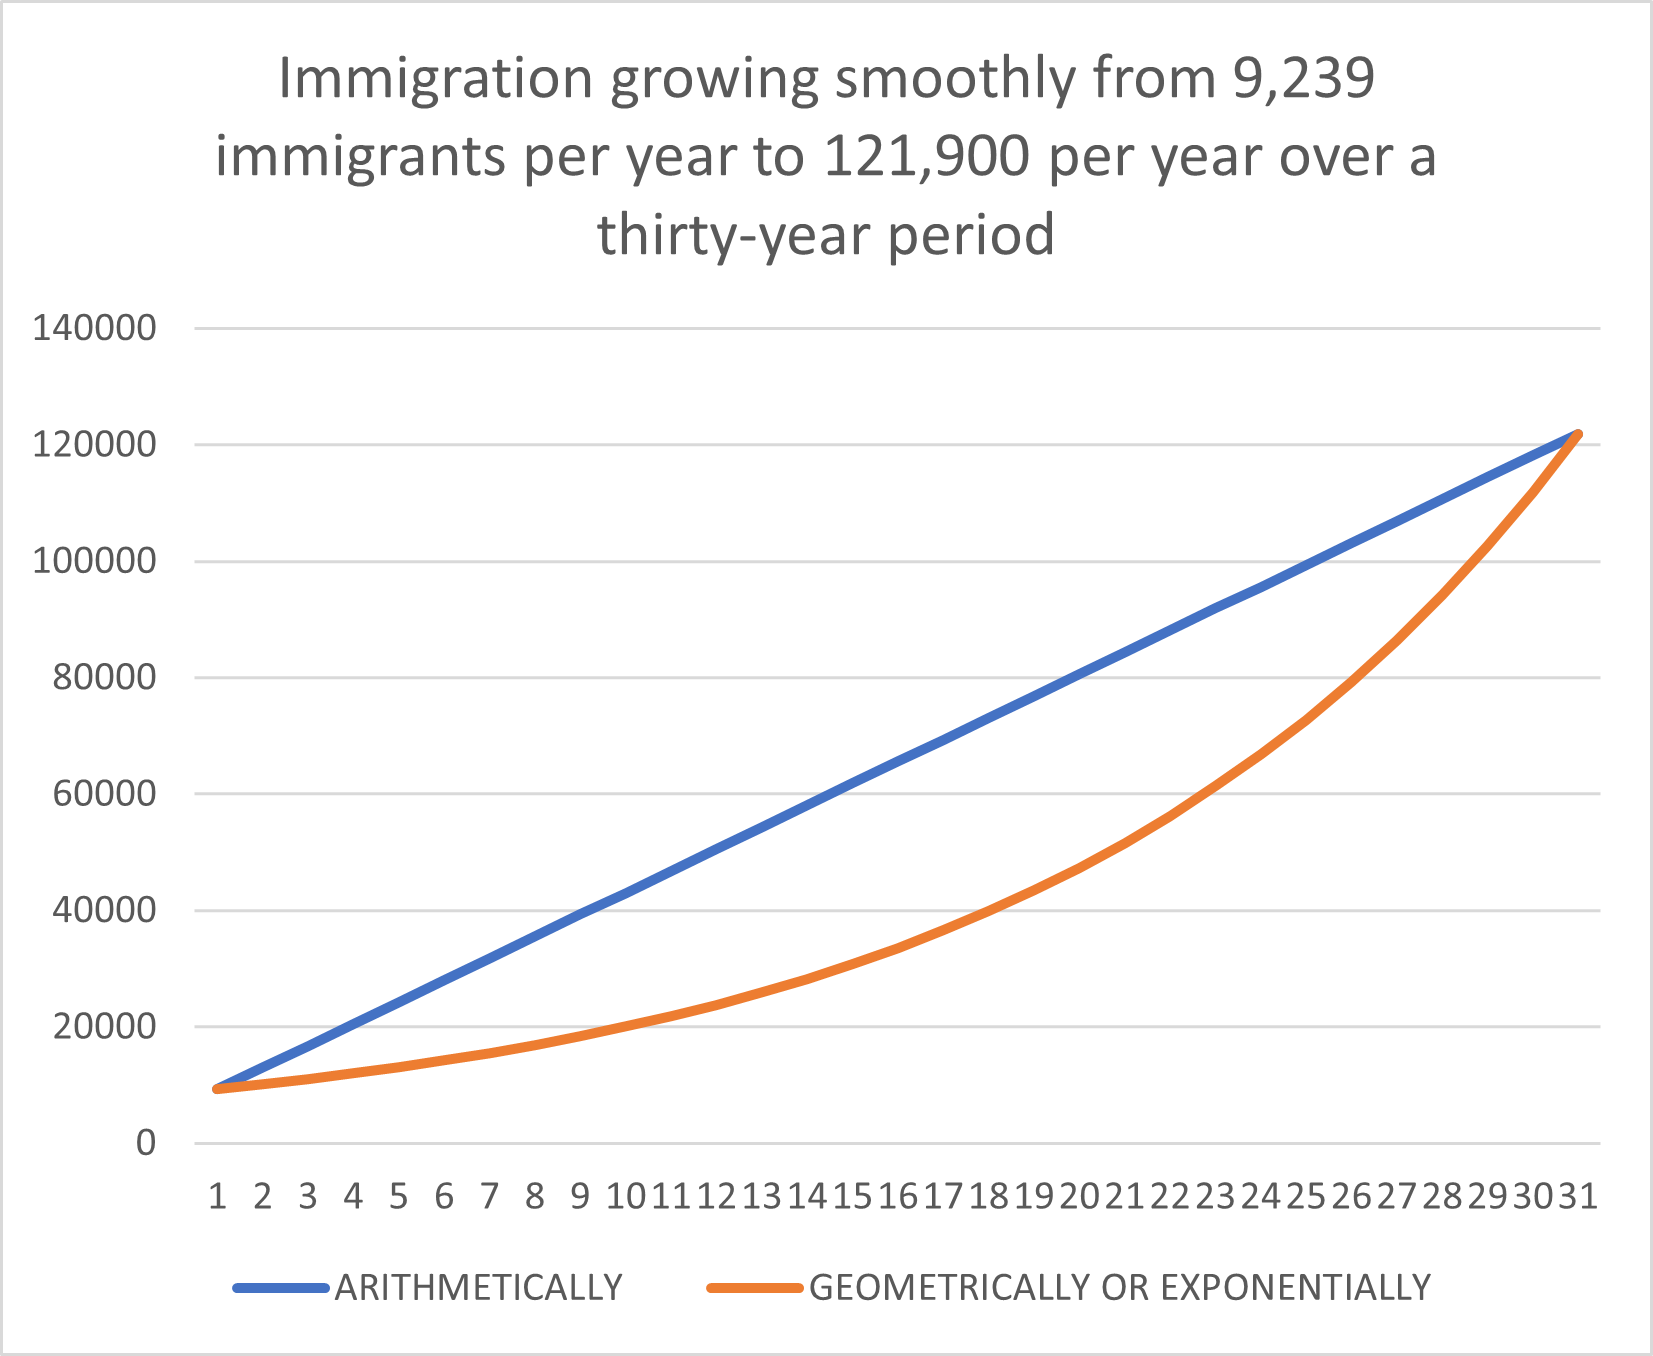 This graph has the number of immigrants arriving in a year on the vertical axis. The horizontal axis is the number of years that go by. Arithmetic growth connects the number of immigrants in the first year to the number of immigrants in the last year by a straight line. Geometric or exponential growth connects the two points with a curved line bowed under the straight line.